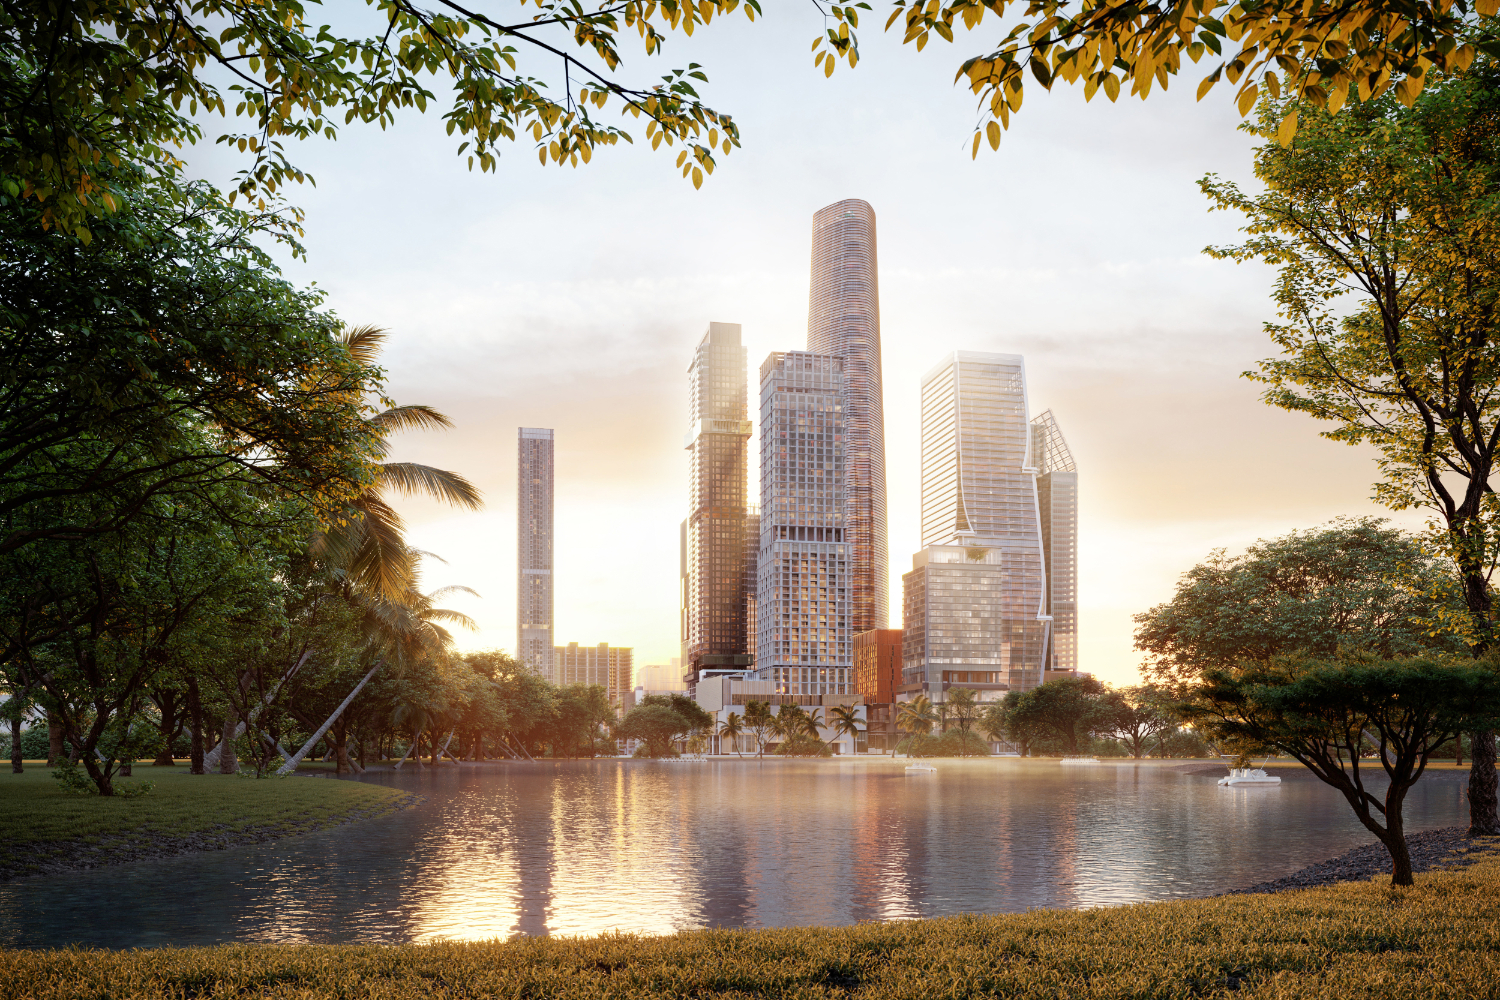 Artist Impression* of One Bangkok, an integrated mixed-use development by Frasers Property scheduled for opening in Q4 2023.